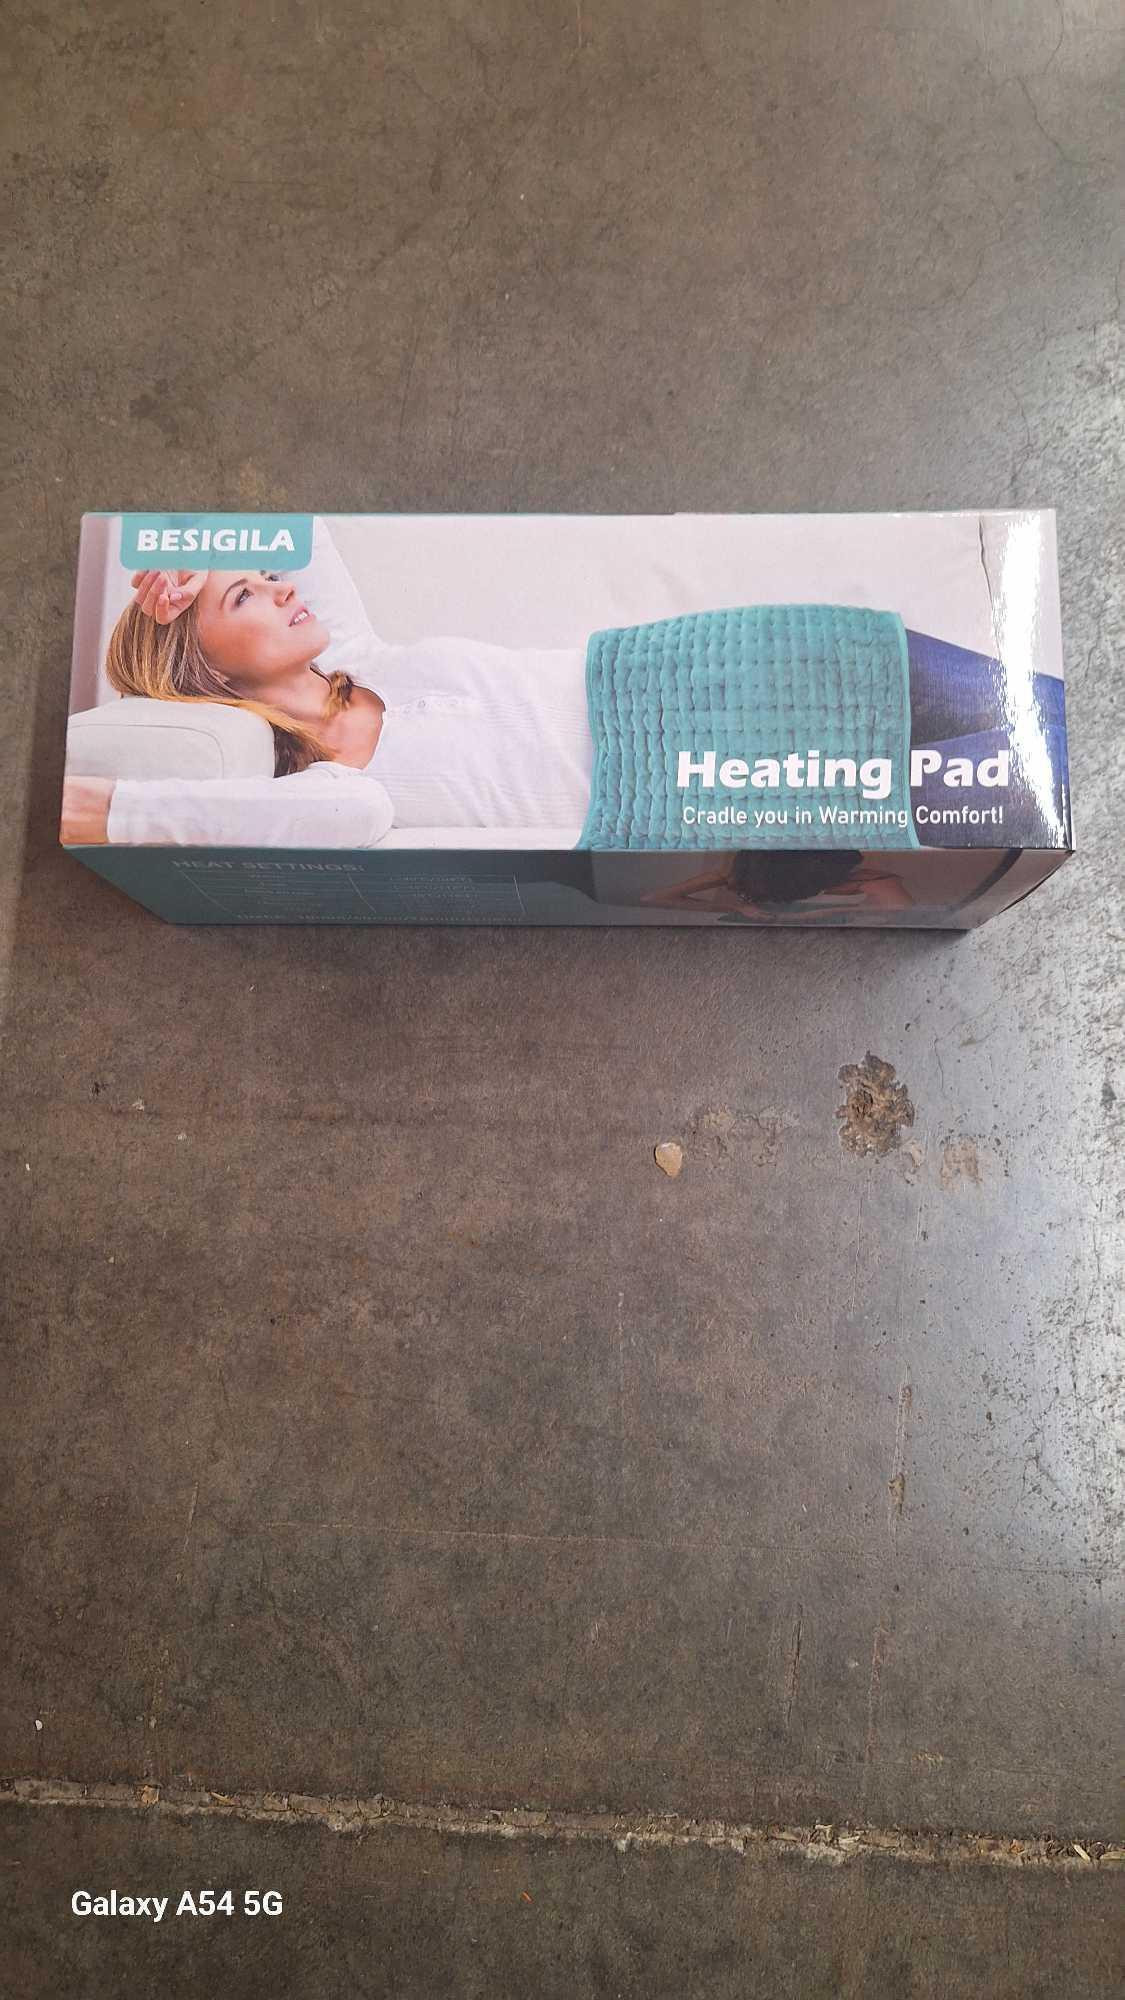 Electric Heating pad for Back/Shoulder/Neck/Knee/Leg Pain Relief, 6 Fast Heat Settings, $29.99 MSRP